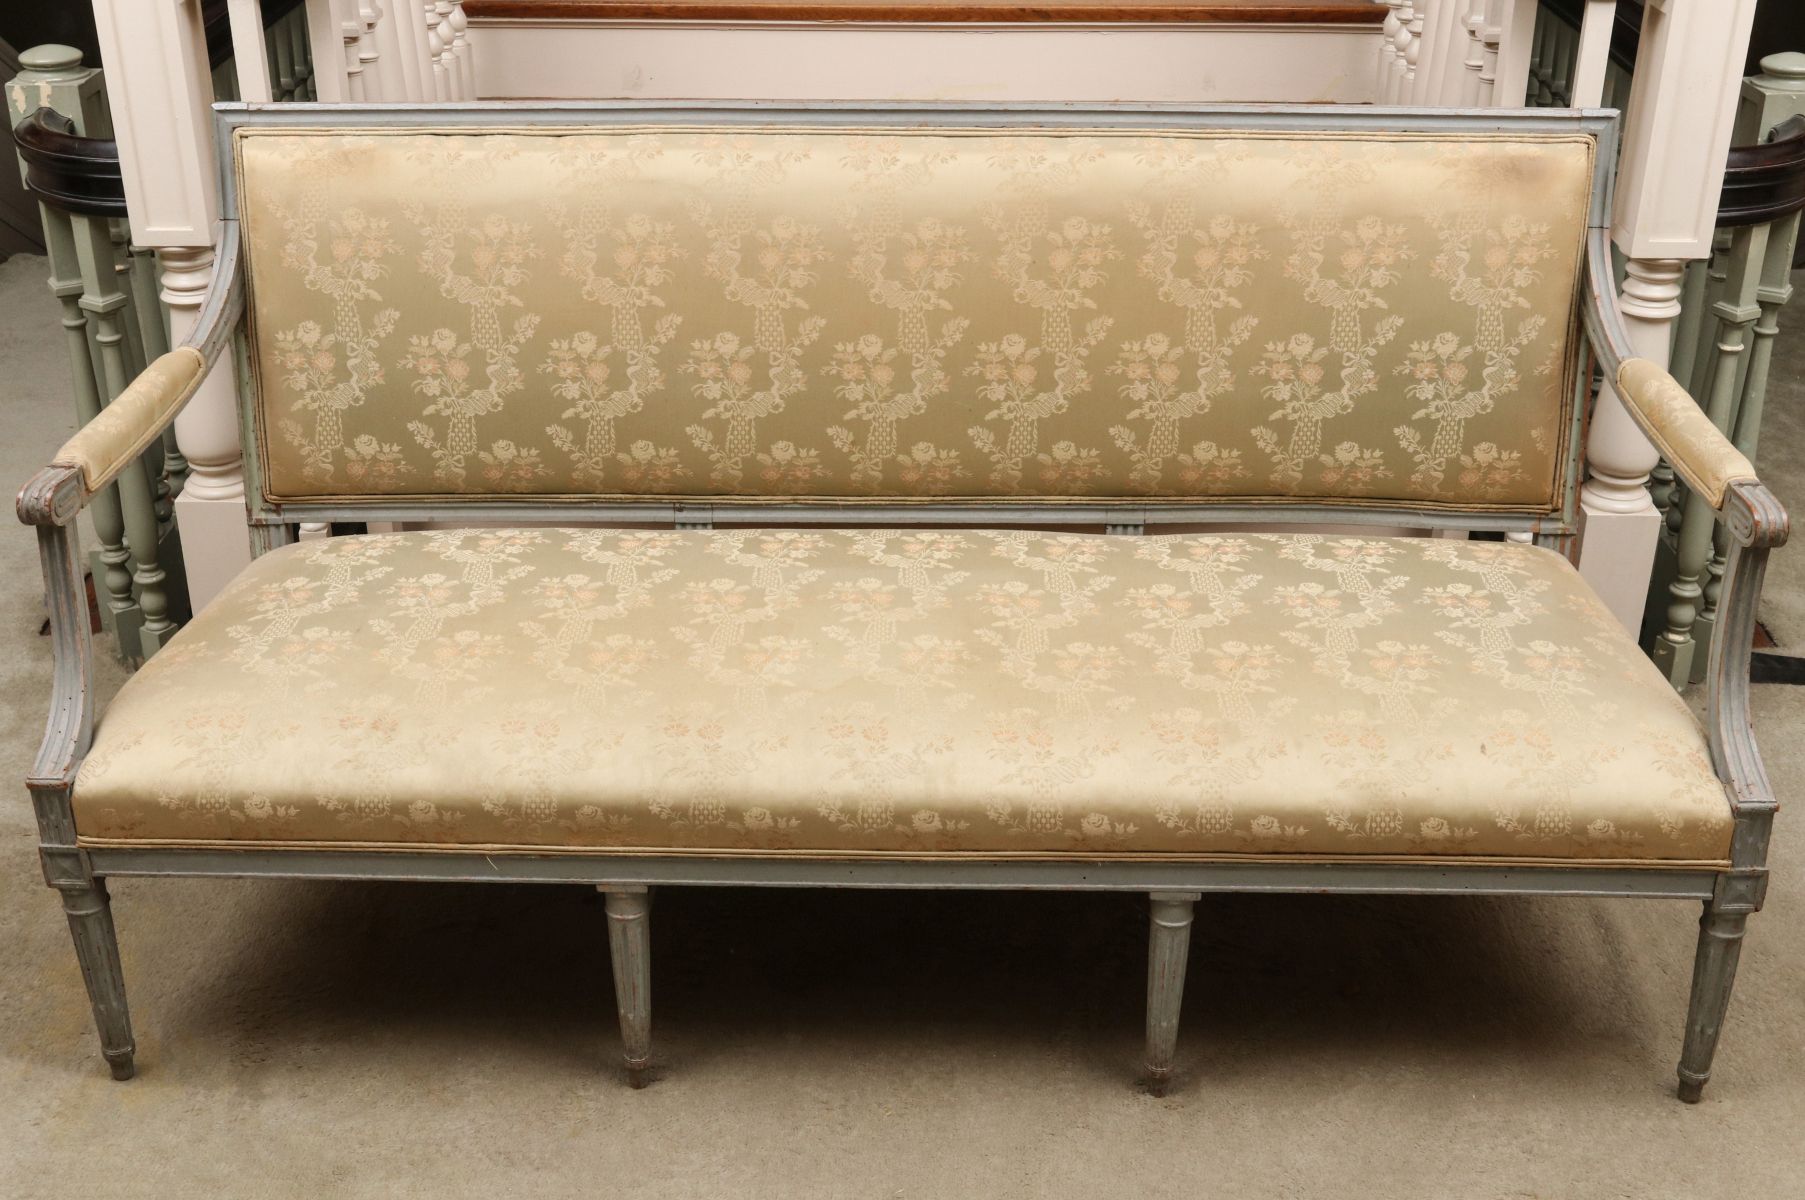 A FINE CARVED AND PAINTED 18TH C. LOUIS XVI PERIOD SOFA